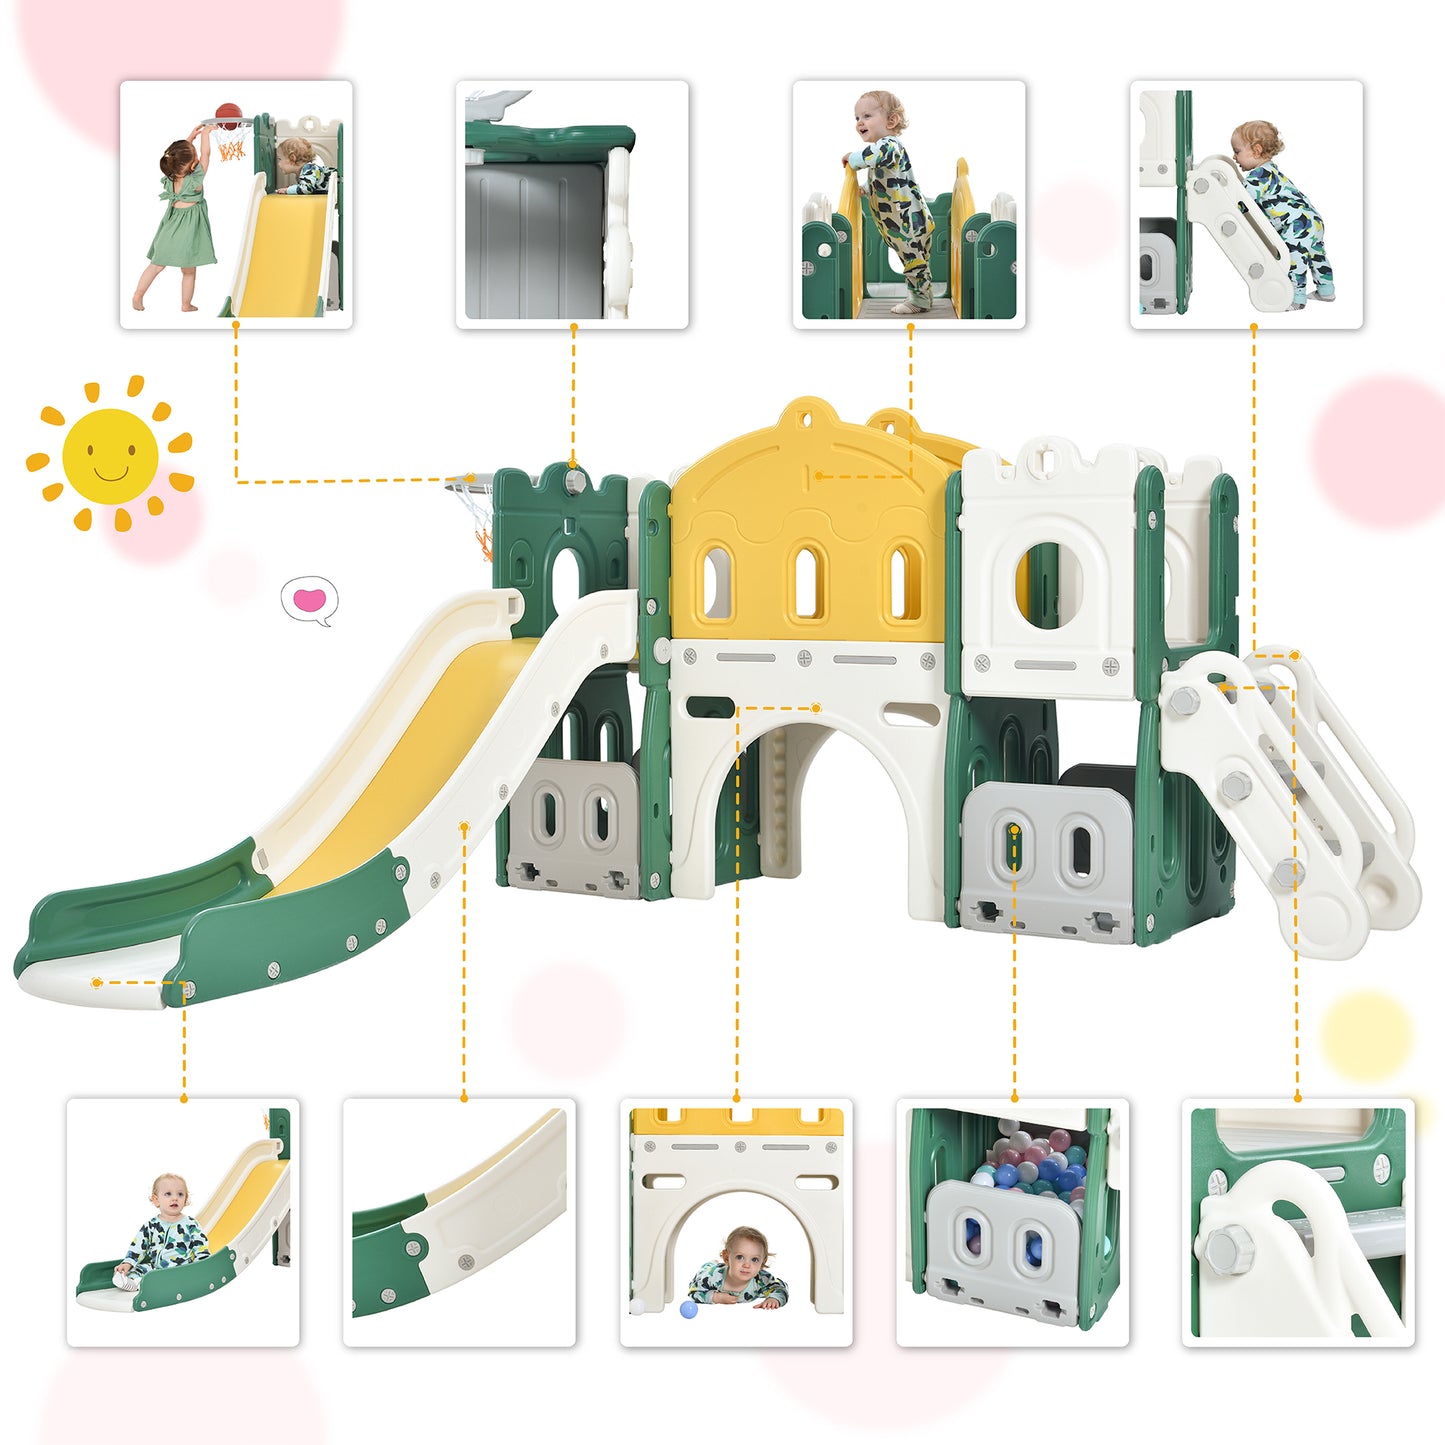 Kids Slide Playset Structure, Freestanding Castle Climber with Slide and Basketball Hoop, Toy Storage Organizer for Toddlers, Kids Climbers Playhouse for Indoor Outdoor Playground Activity